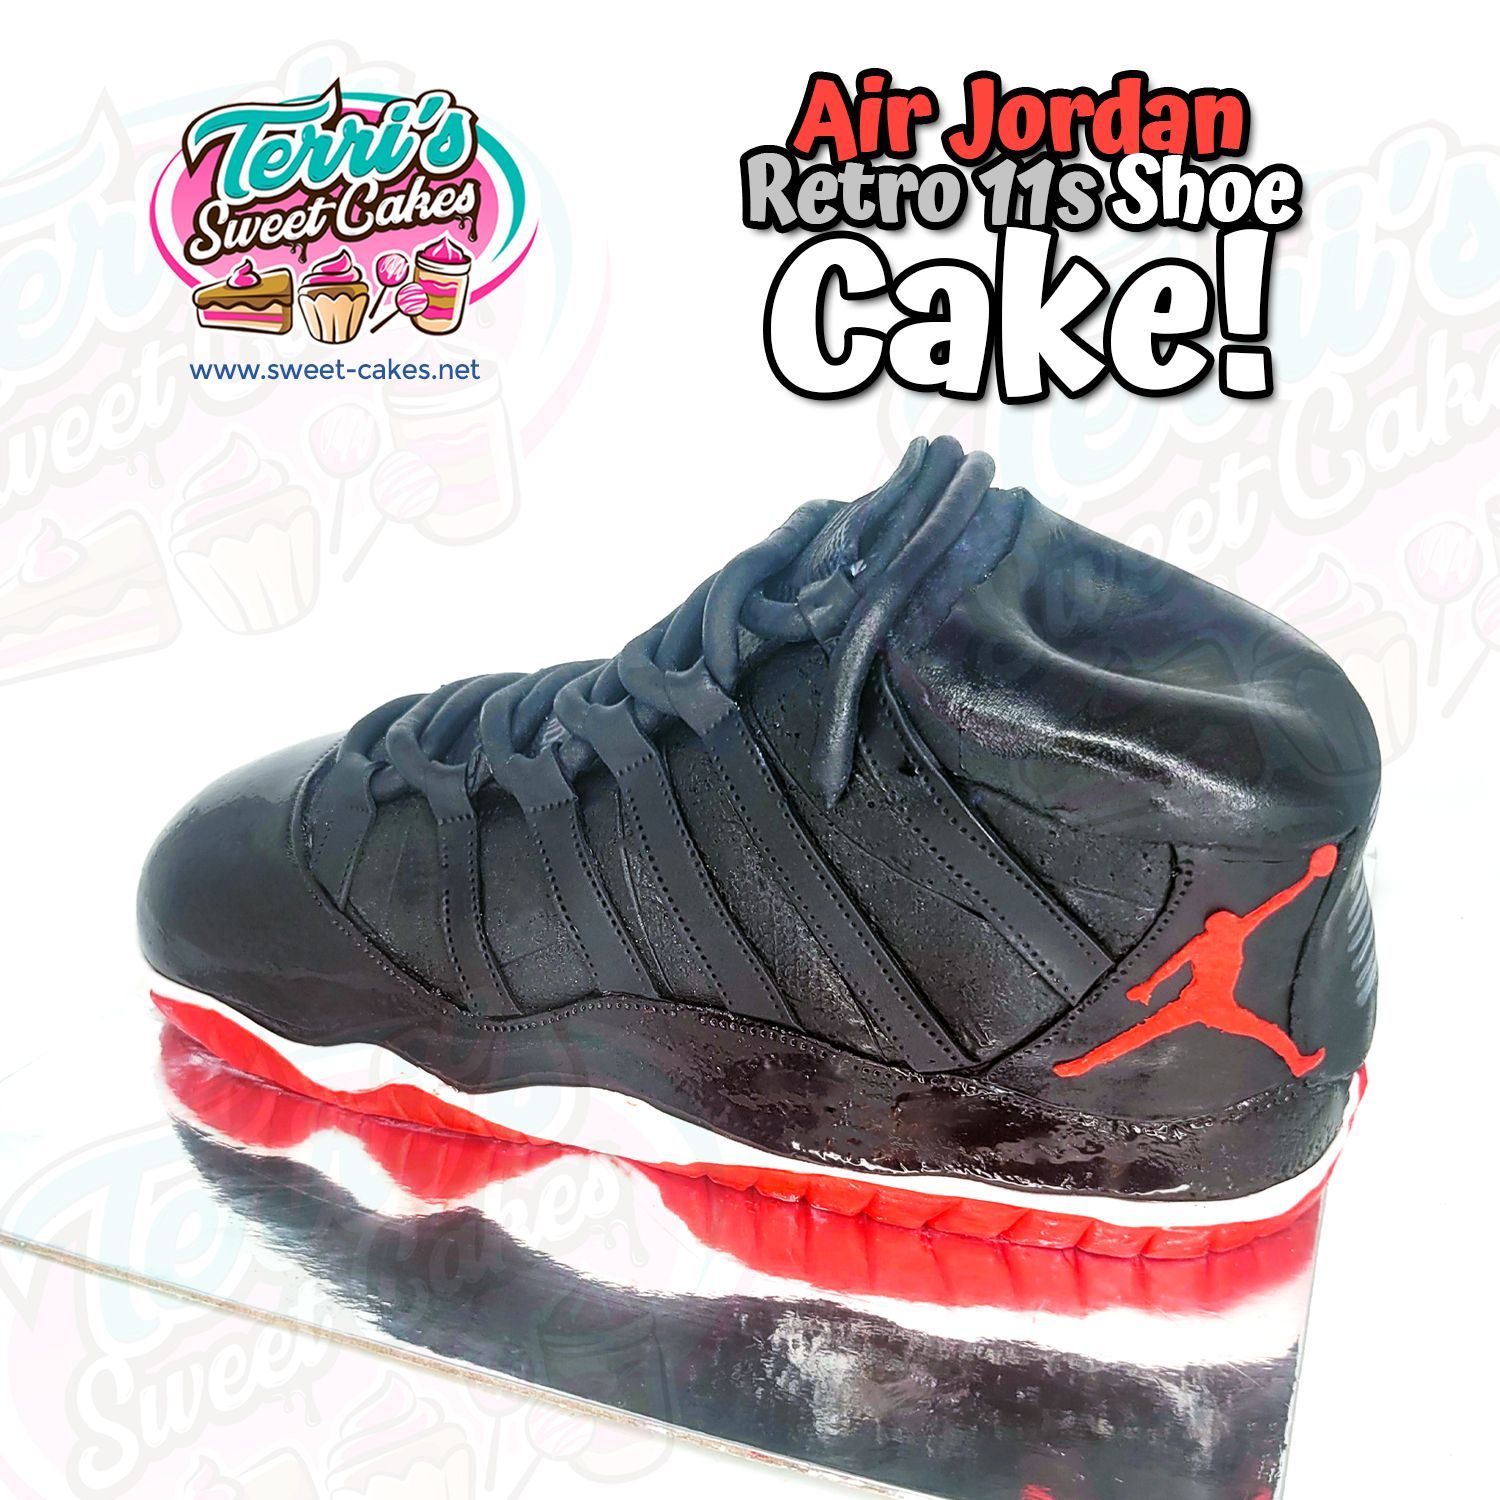 Stunning Air Jordan Retro 11 Shoe Cake, intricately designed and crafted by Terri's Sweet Cakes!